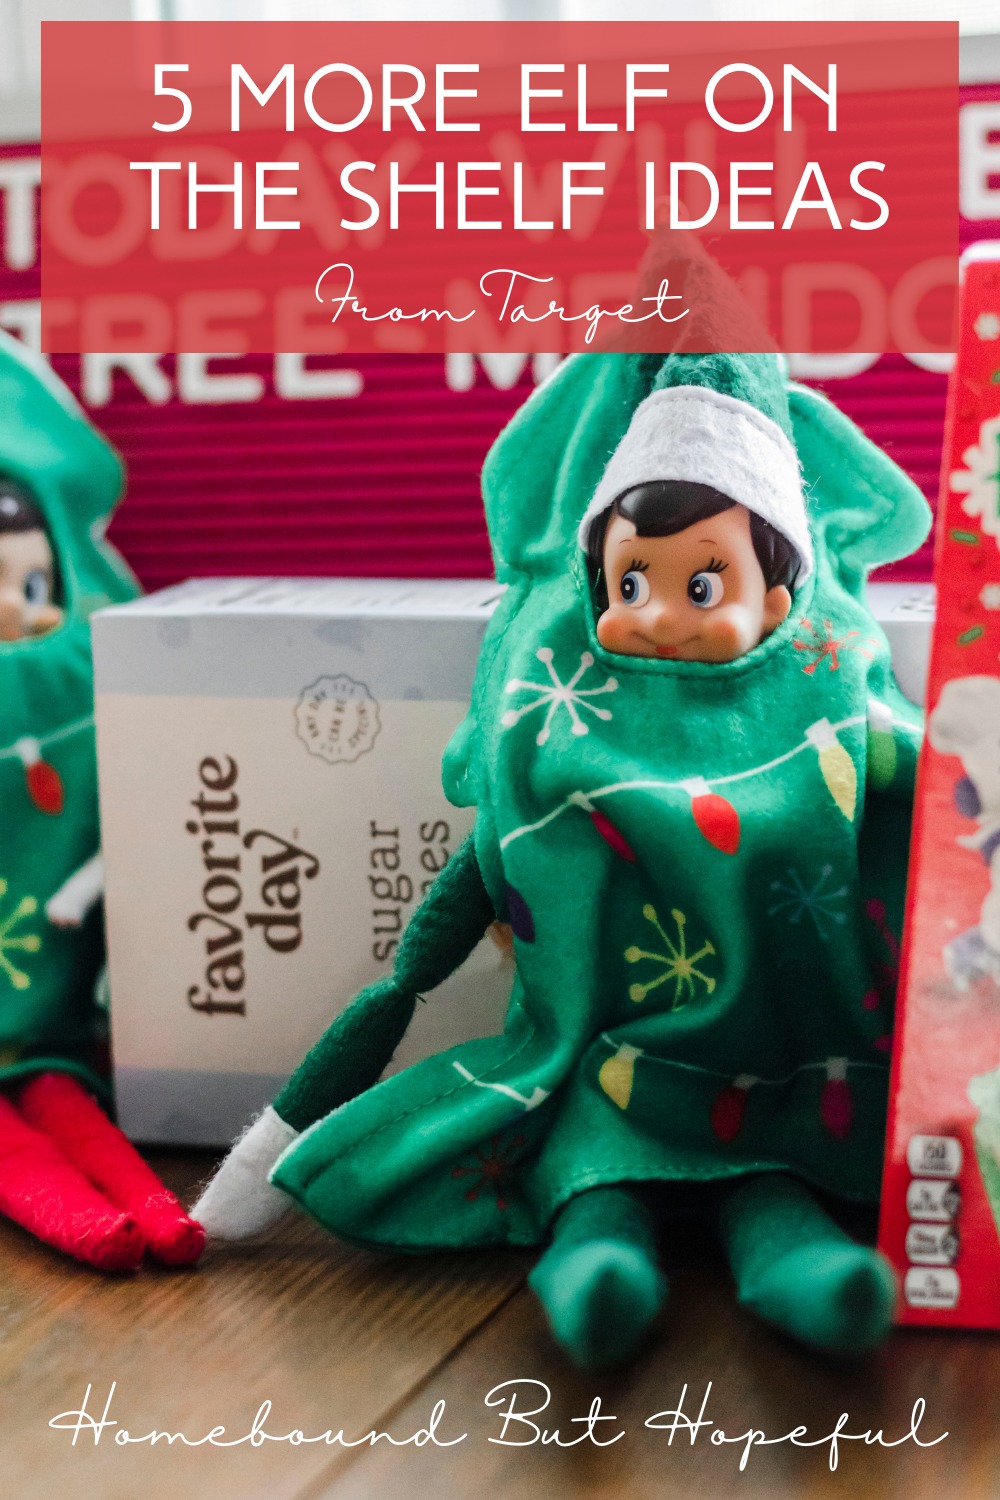 The elves are coming! Get ready with 5 more Elf on the Shelf ideas using goodies from Target!